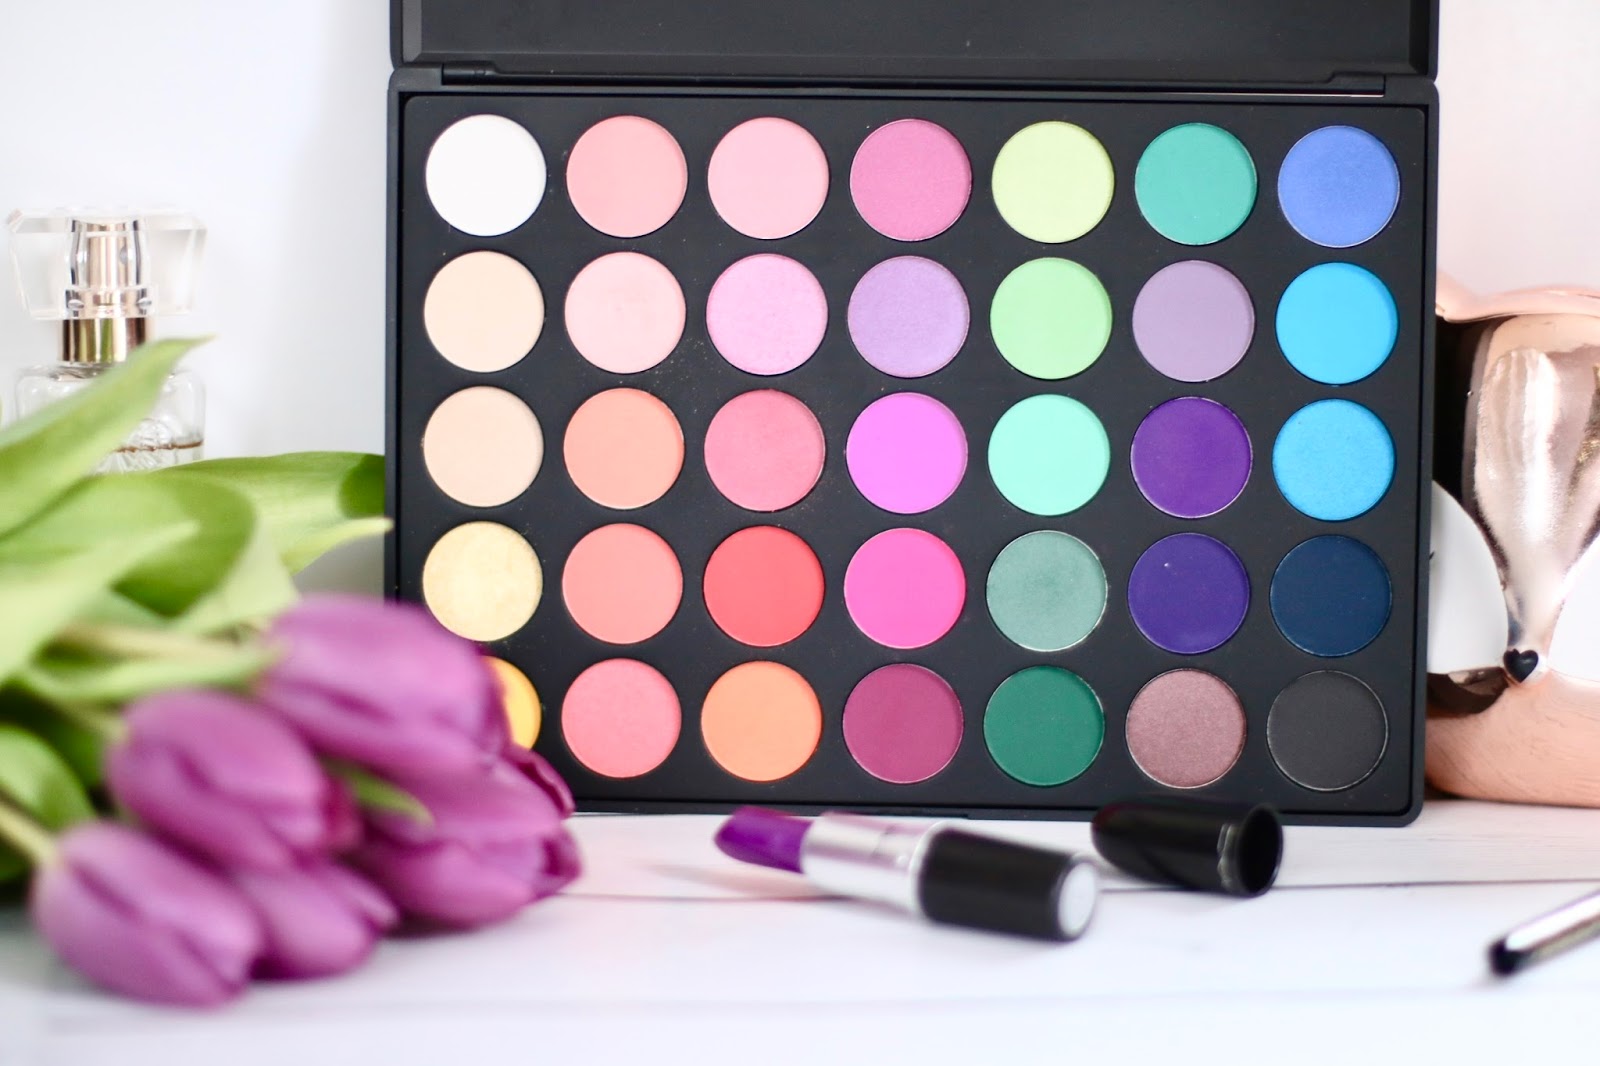 Morphe 35B Color Glam Palette Review & Swatches Ela